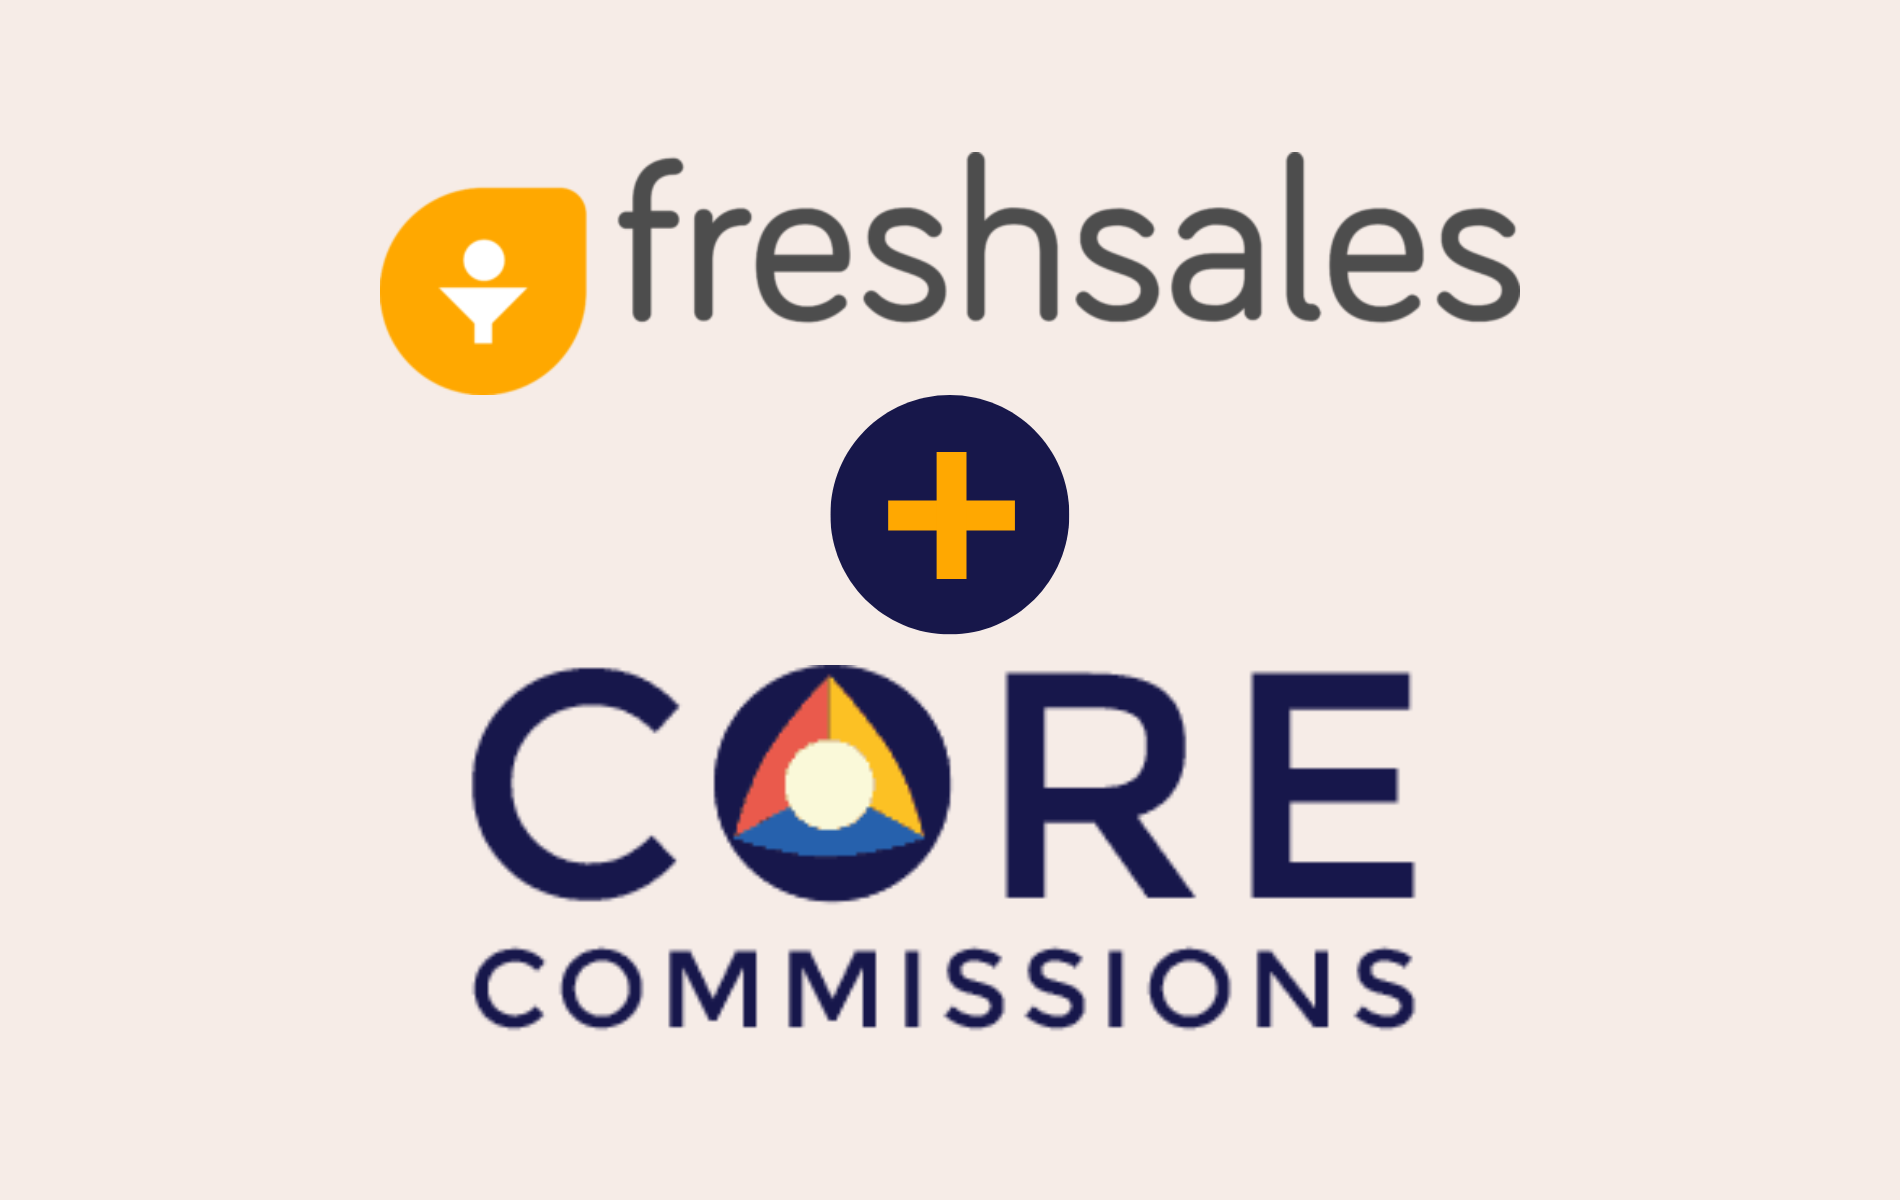 The Freshsales CRM logo shown above a plus sign and the Core Commissions logo.